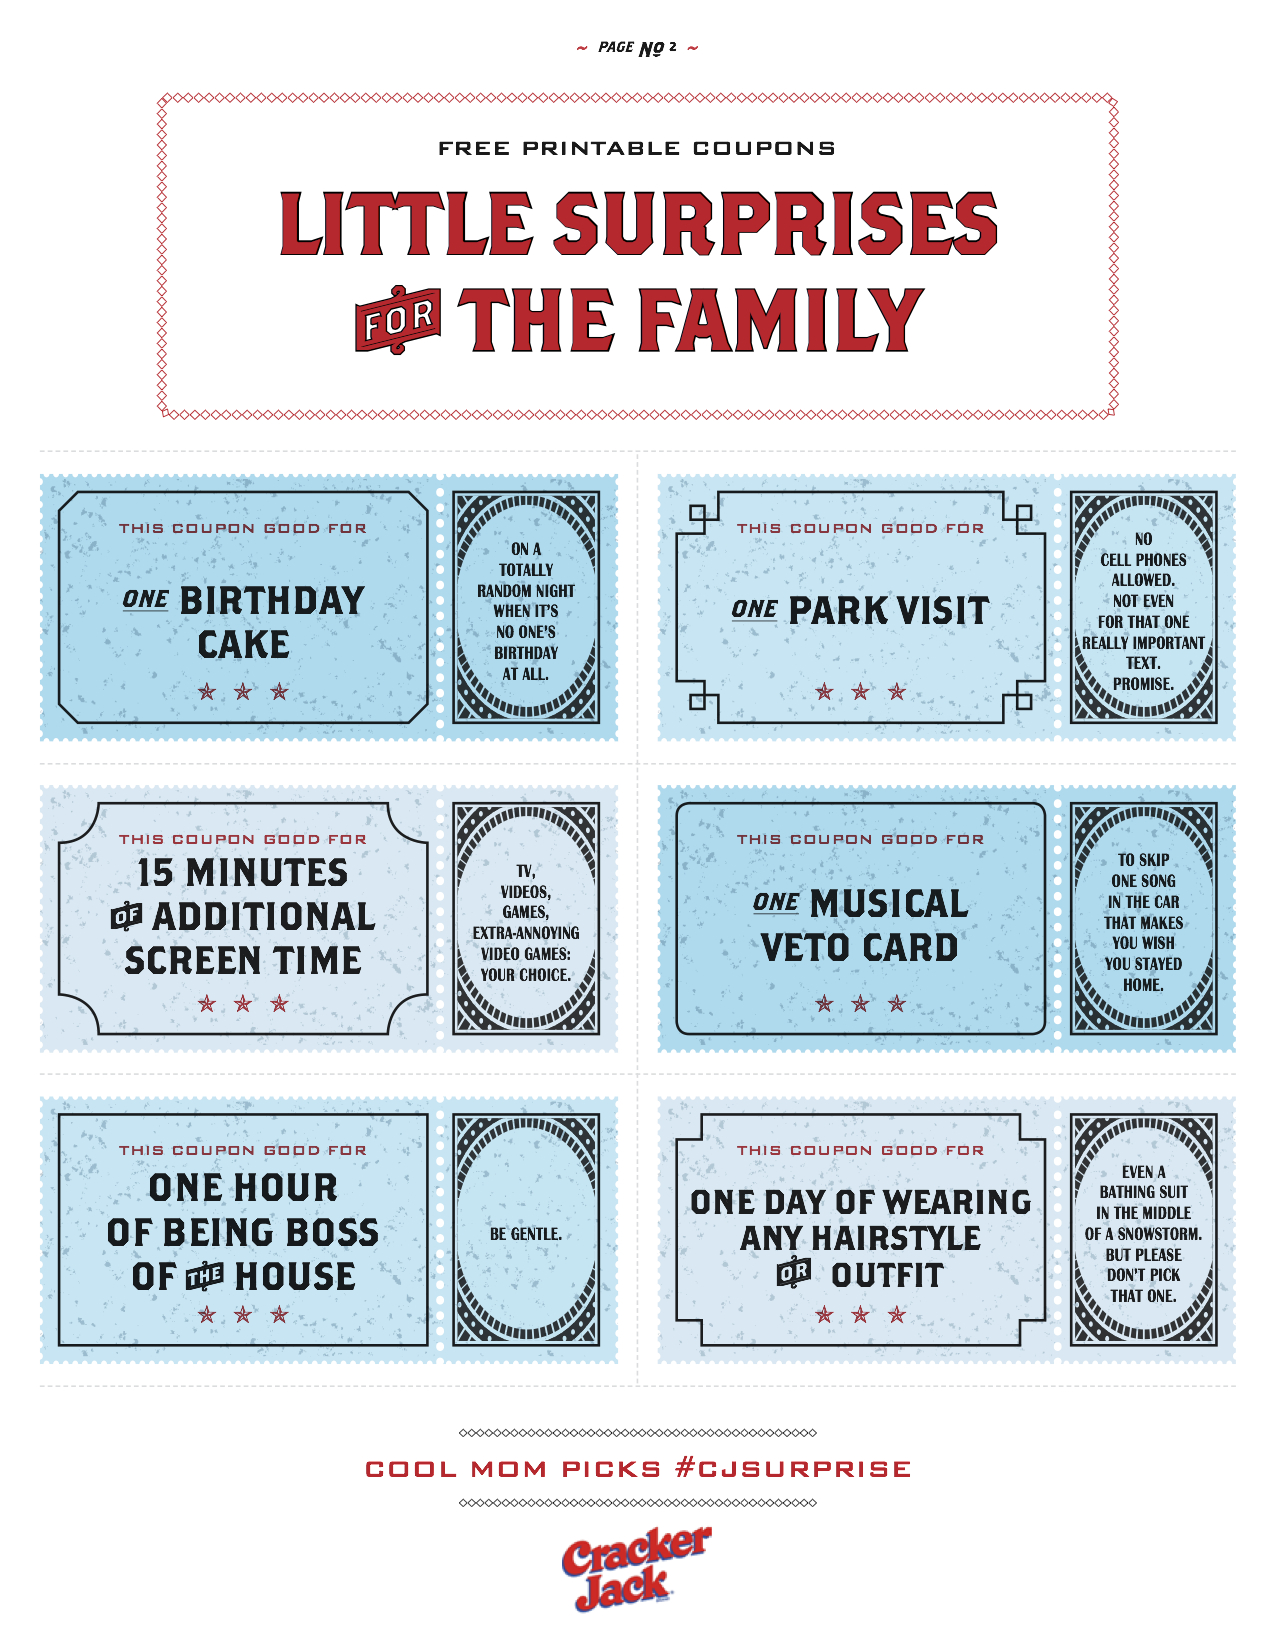 More Free Printable Coupons For Family Surprises You&amp;#039;ll Love - Free Printable Coupons 2014